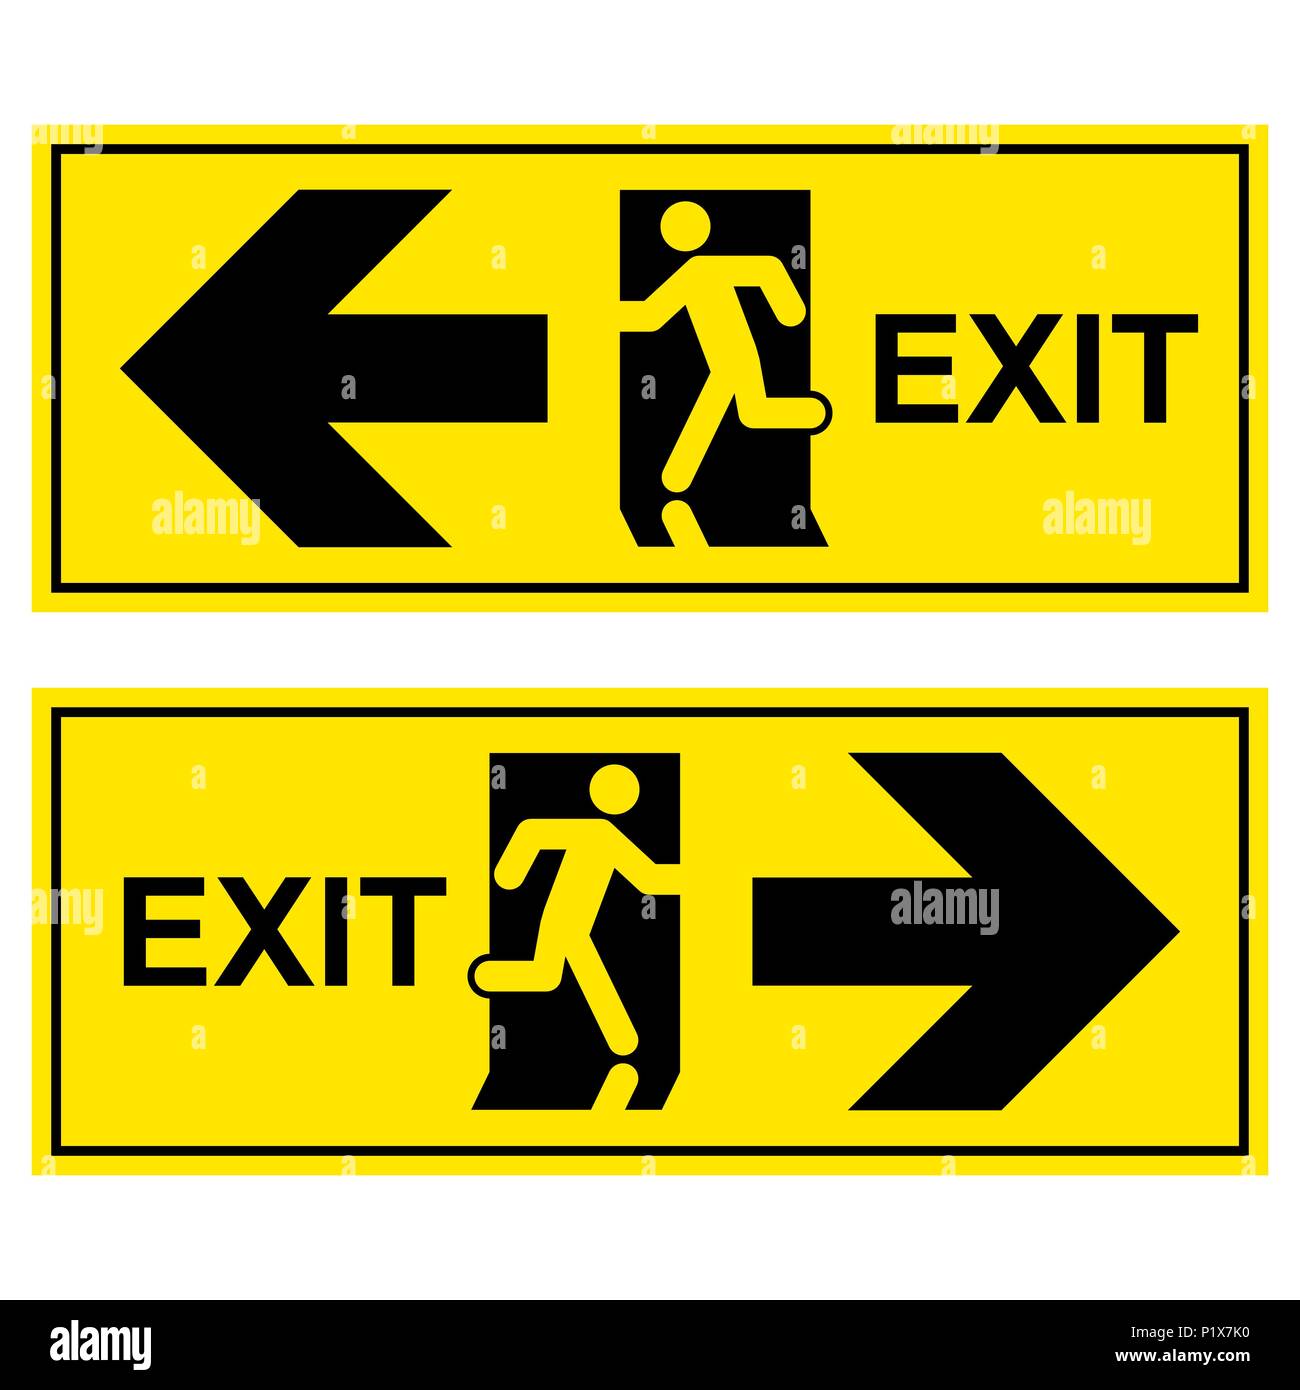 Emergency exit sign. Man running out fire exit. Stock Vector